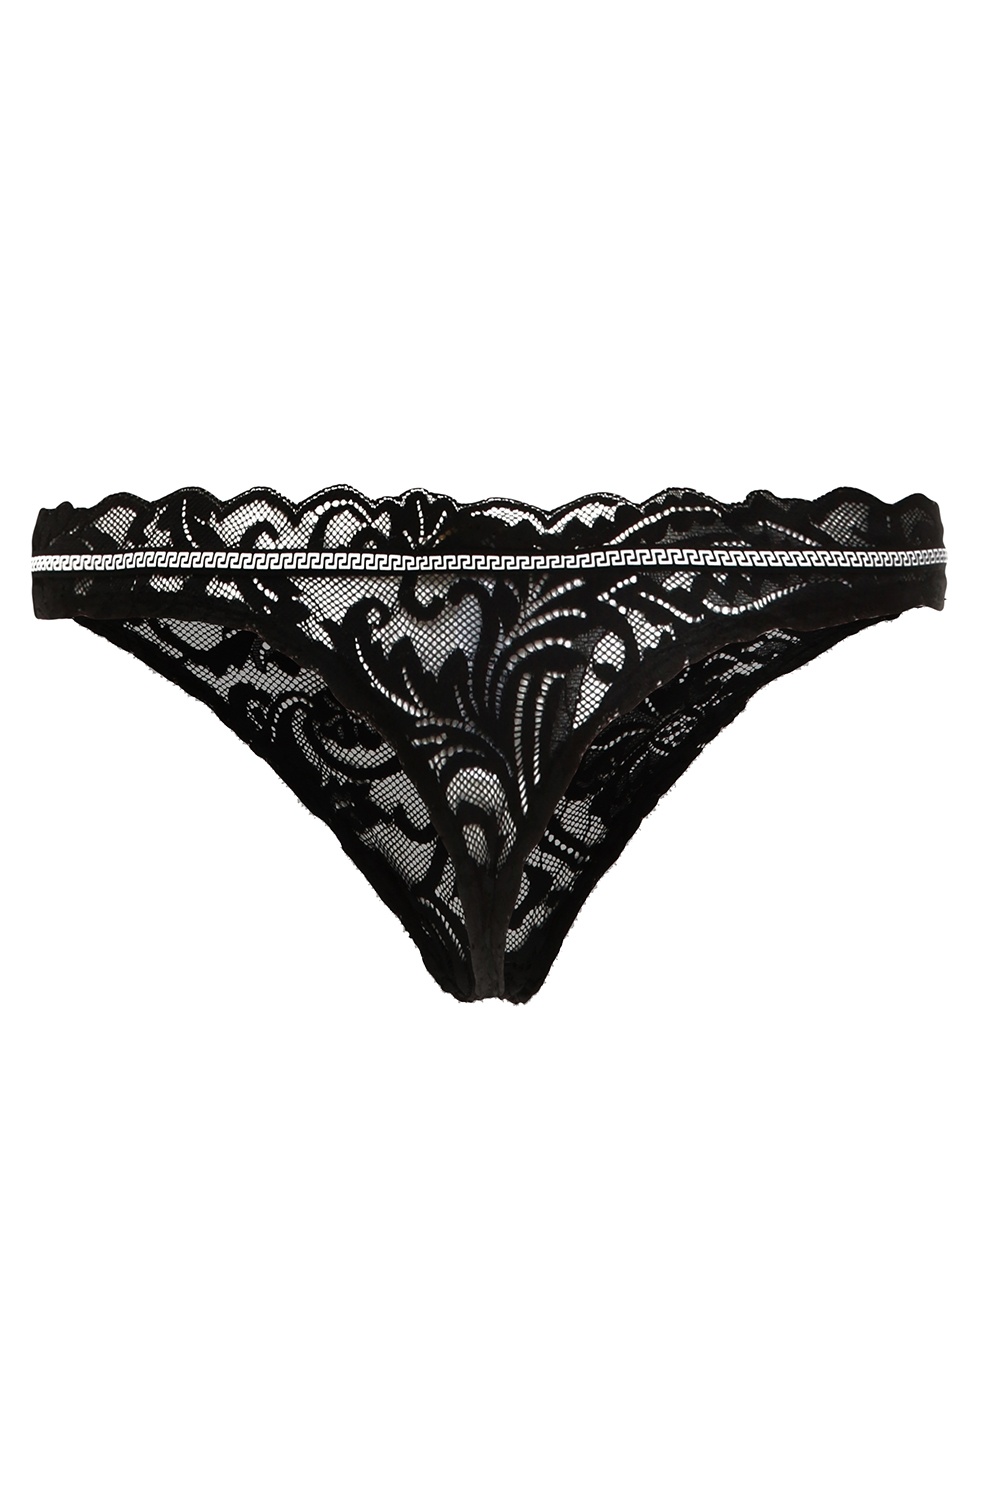 versace lace thong